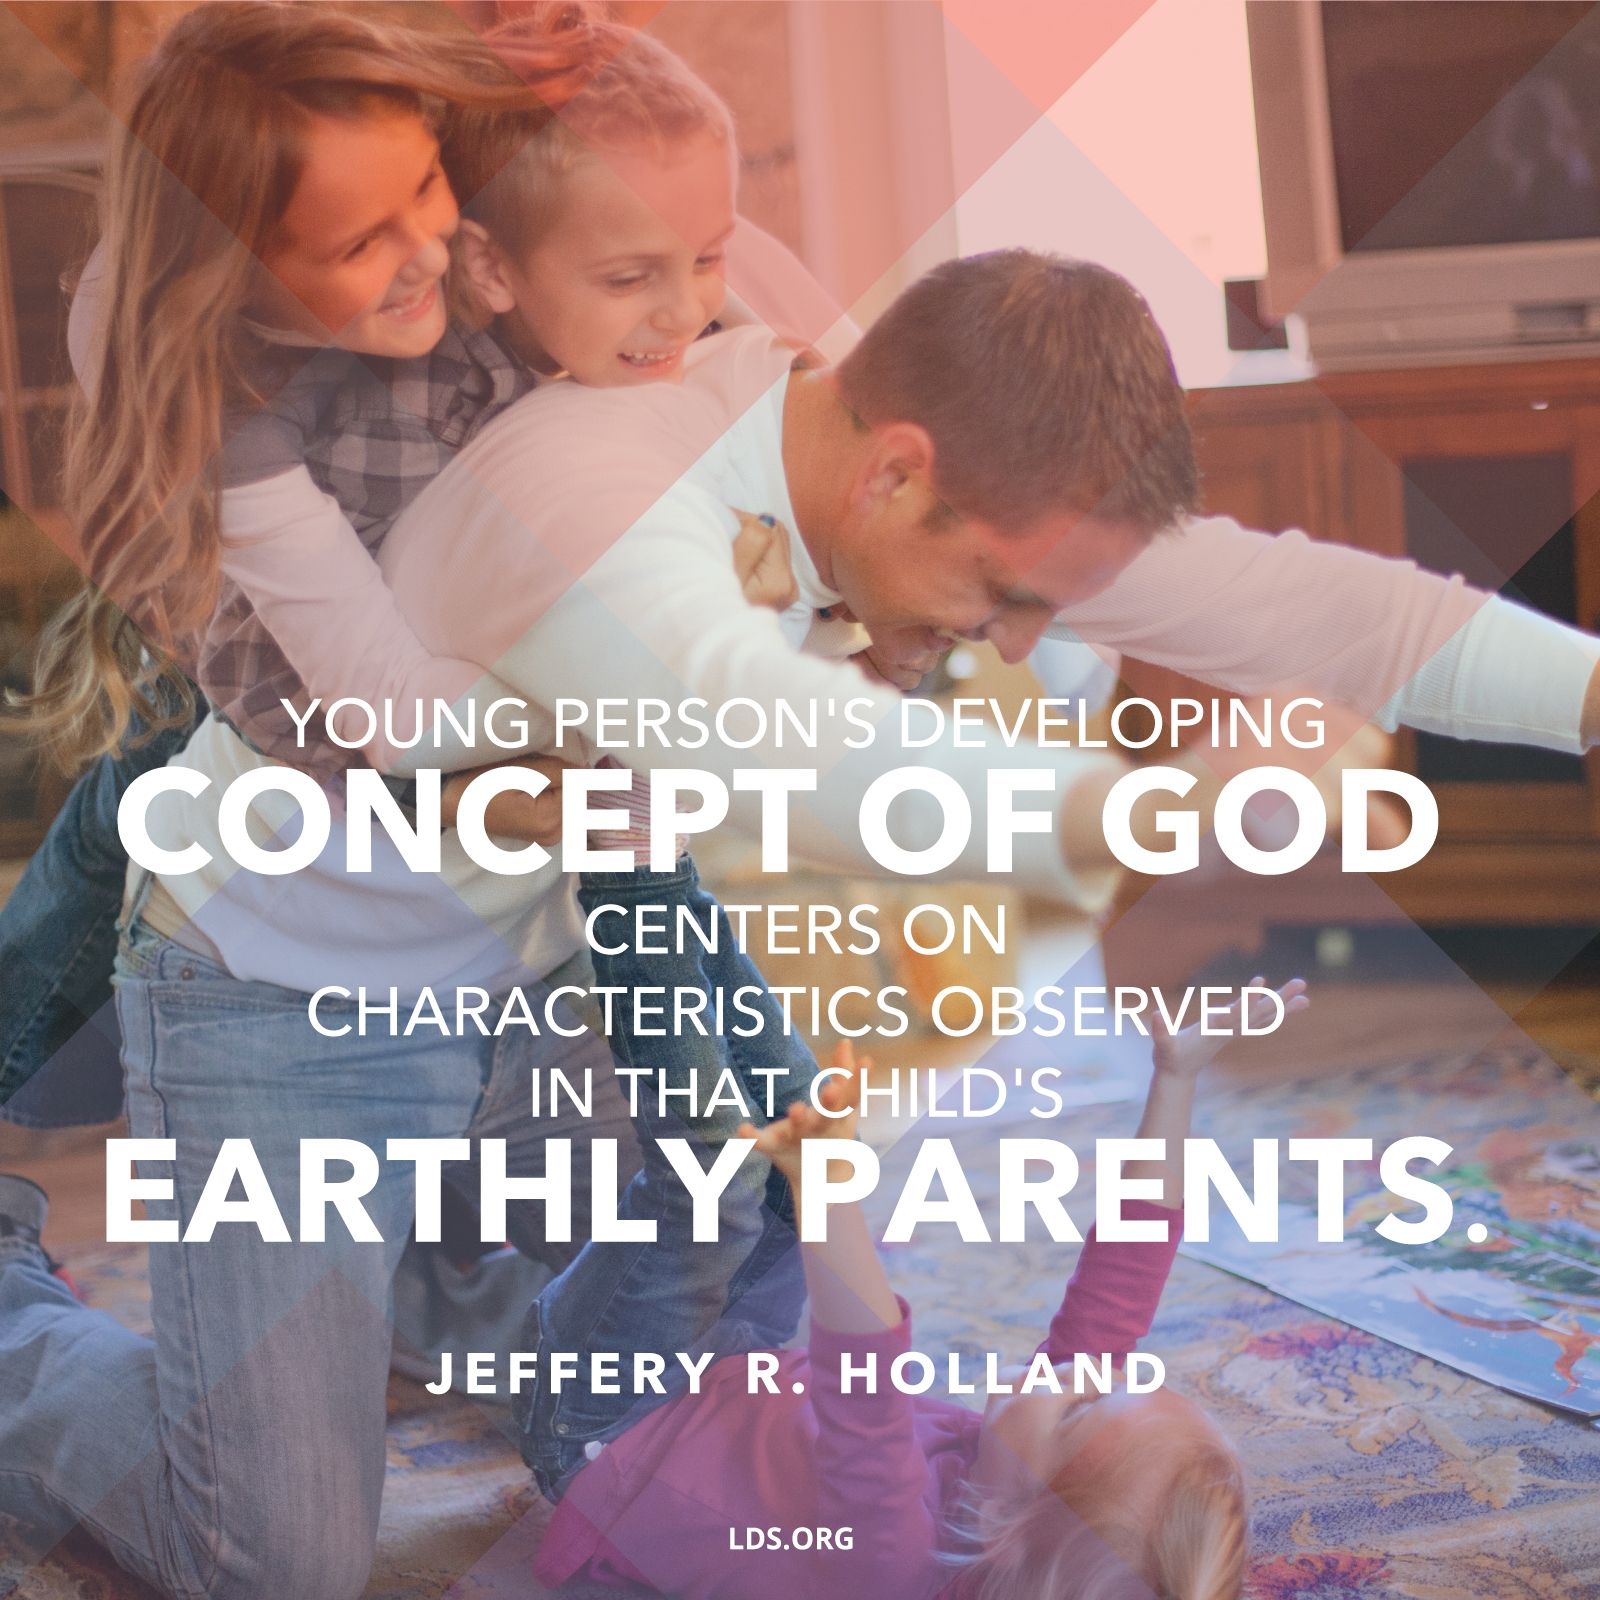 “Young person’s developing concept of God centers on characteristics observed in that child’s earthly parents.”—Elder Jeffrey R. Holland, “The Hands of the Fathers” © undefined ipCode 1.